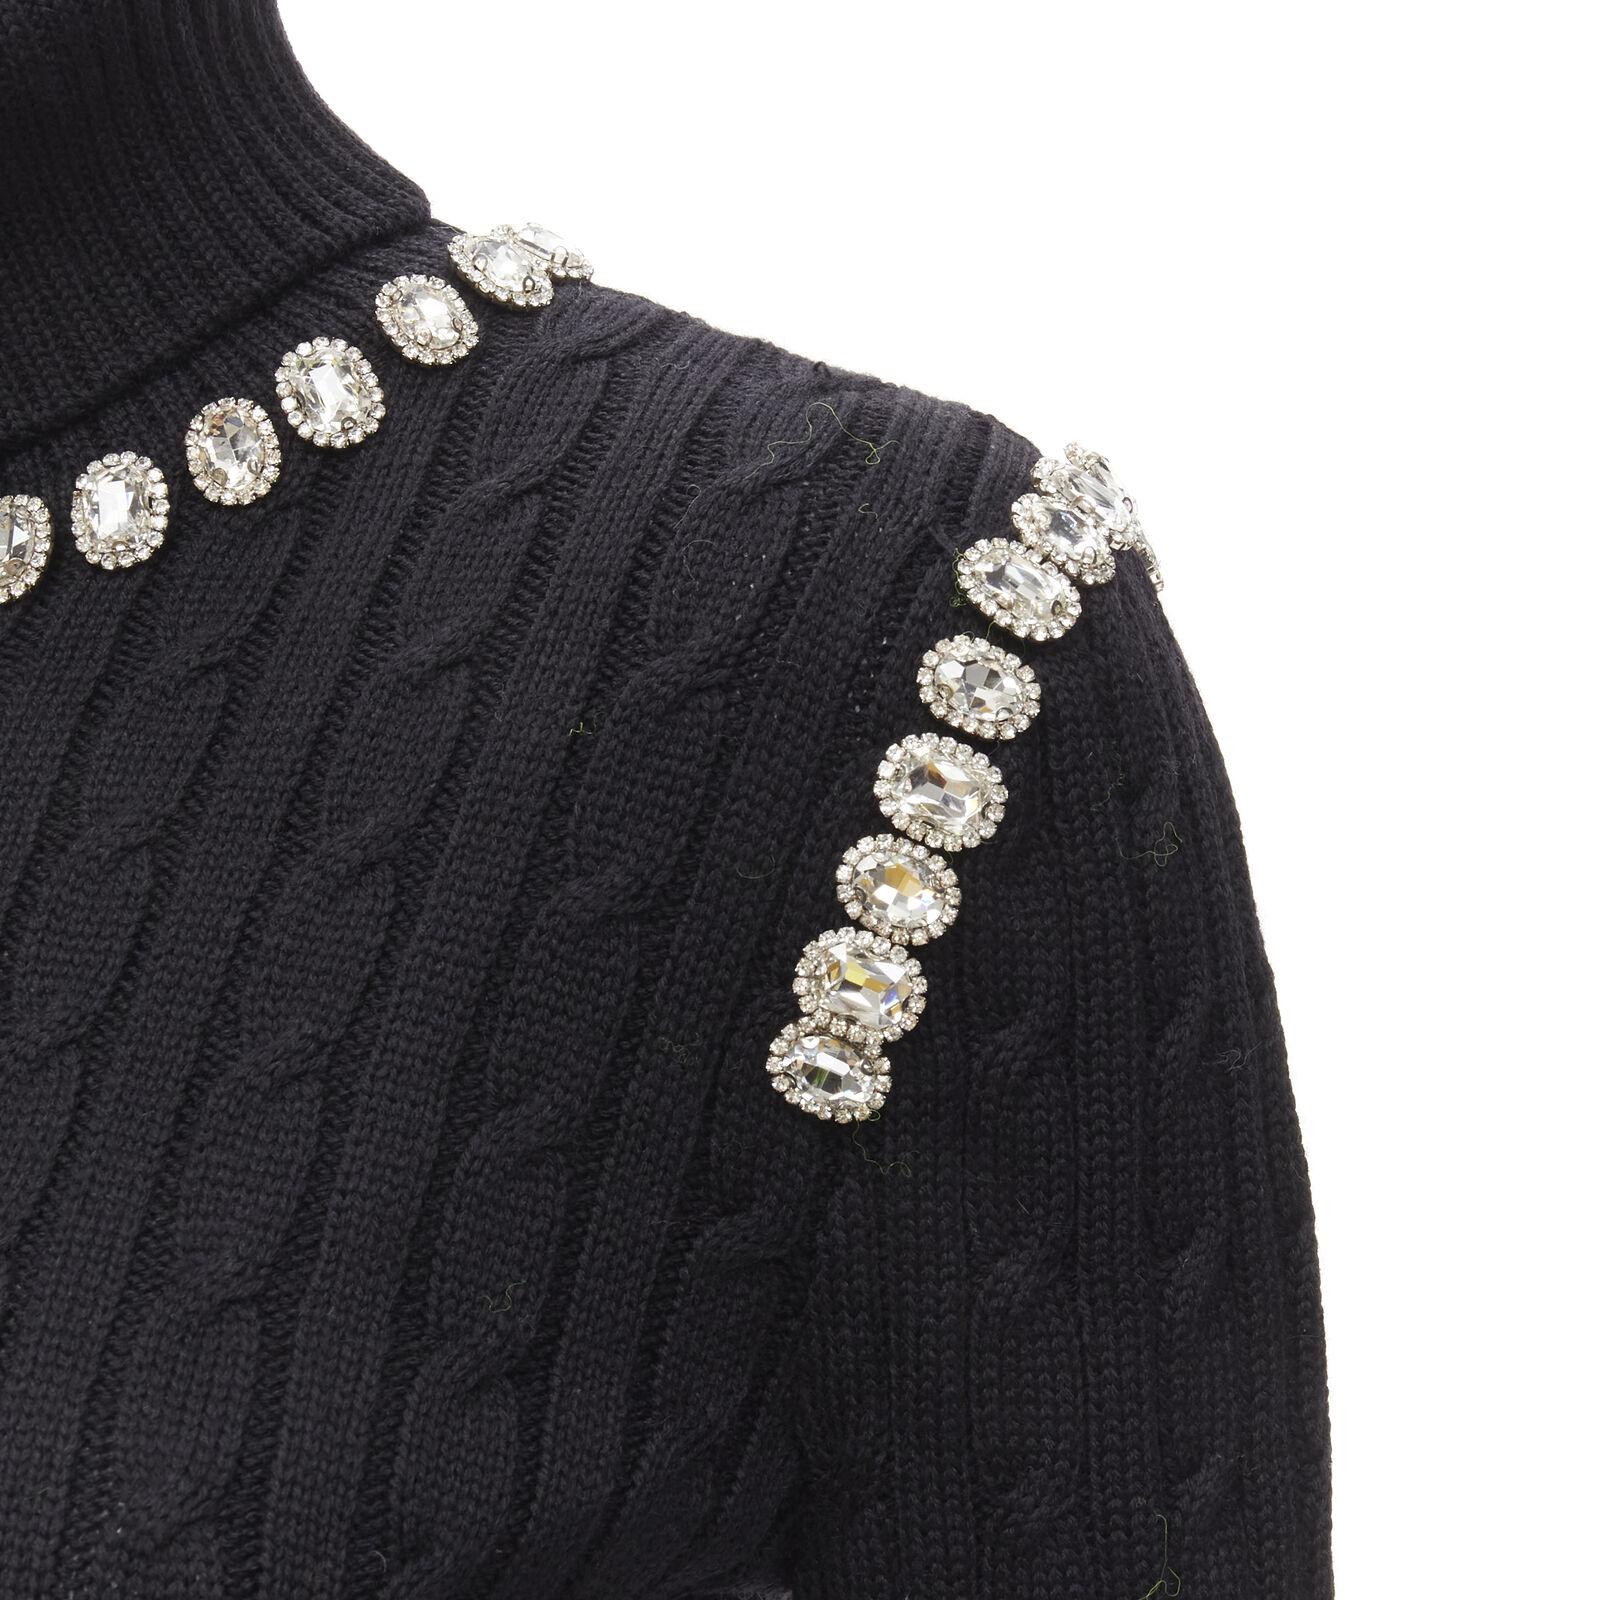 GIUSEPPE DI MORABITO black wool crystal embellished cable knit turtleneck IT38
Reference: AAWC/A00244
Brand: Giuseppe Di Morabito
Material: 100% Wool
Color: Black, Silver
Pattern: Solid
Made in: Italy

CONDITION:
Condition: Excellent, this item was